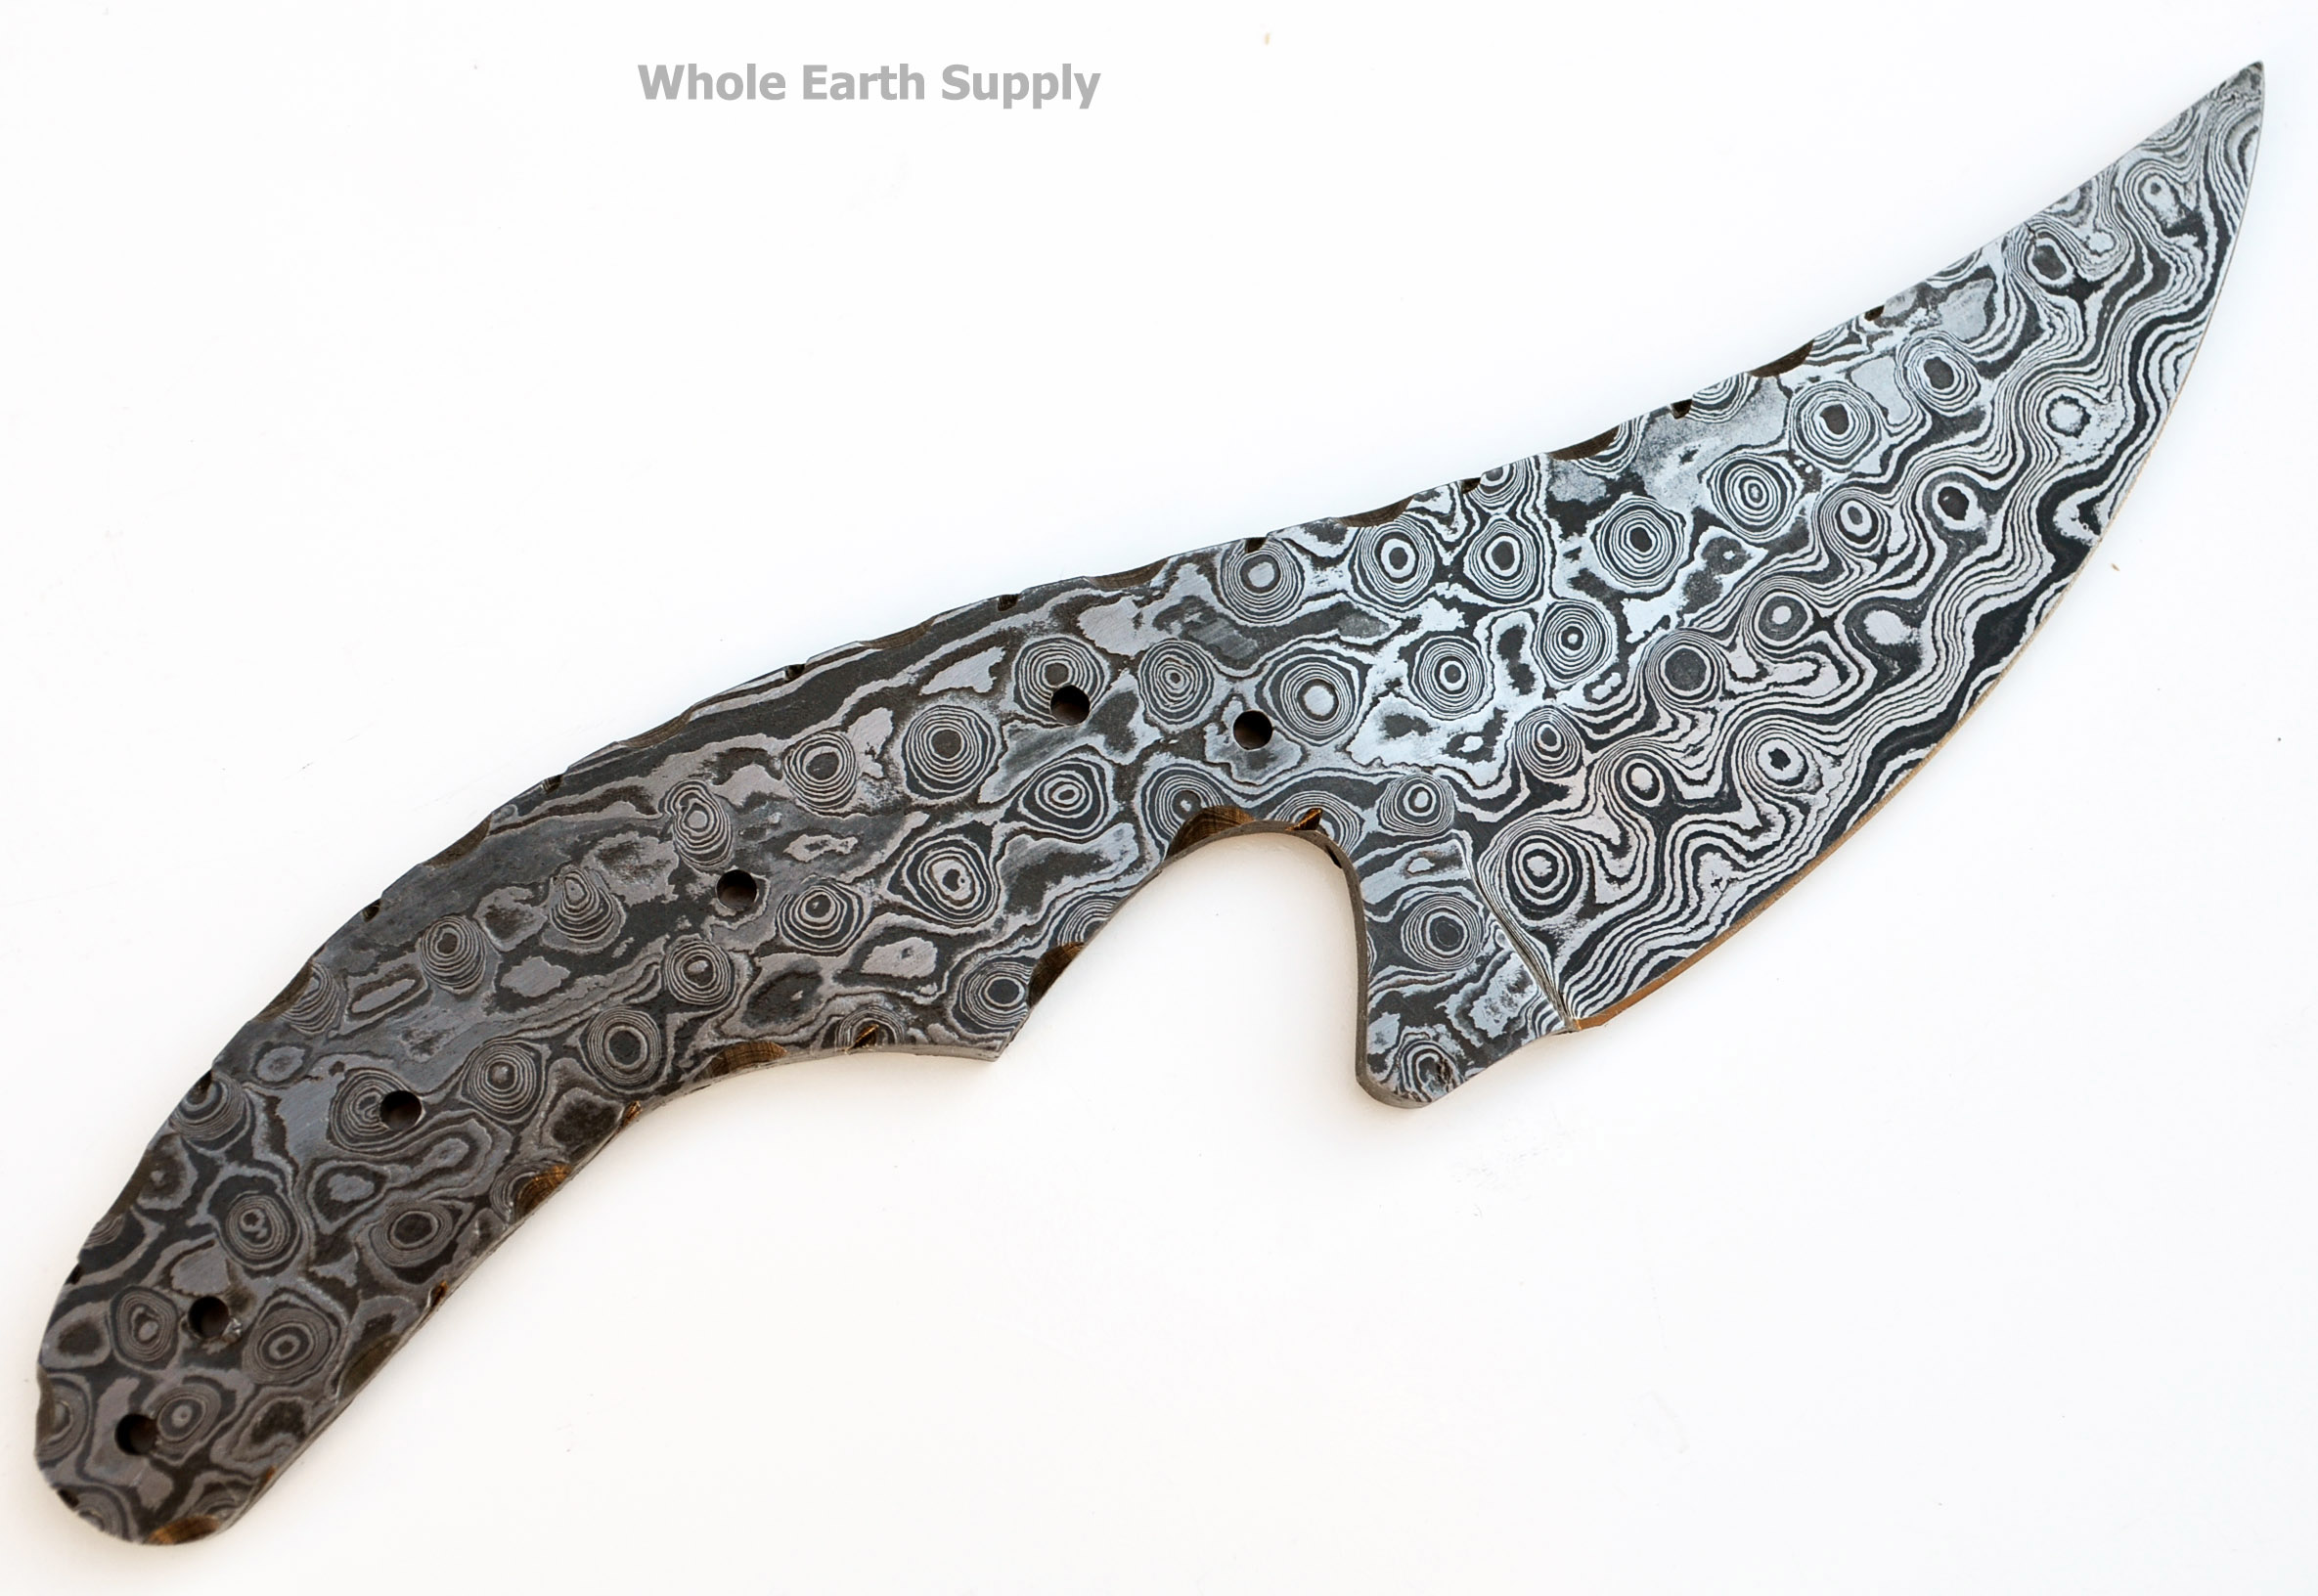 Upswept Curved Skinning Damascus High Carbon Steel Blank Blanks Blade Knife Knives Making Hunting